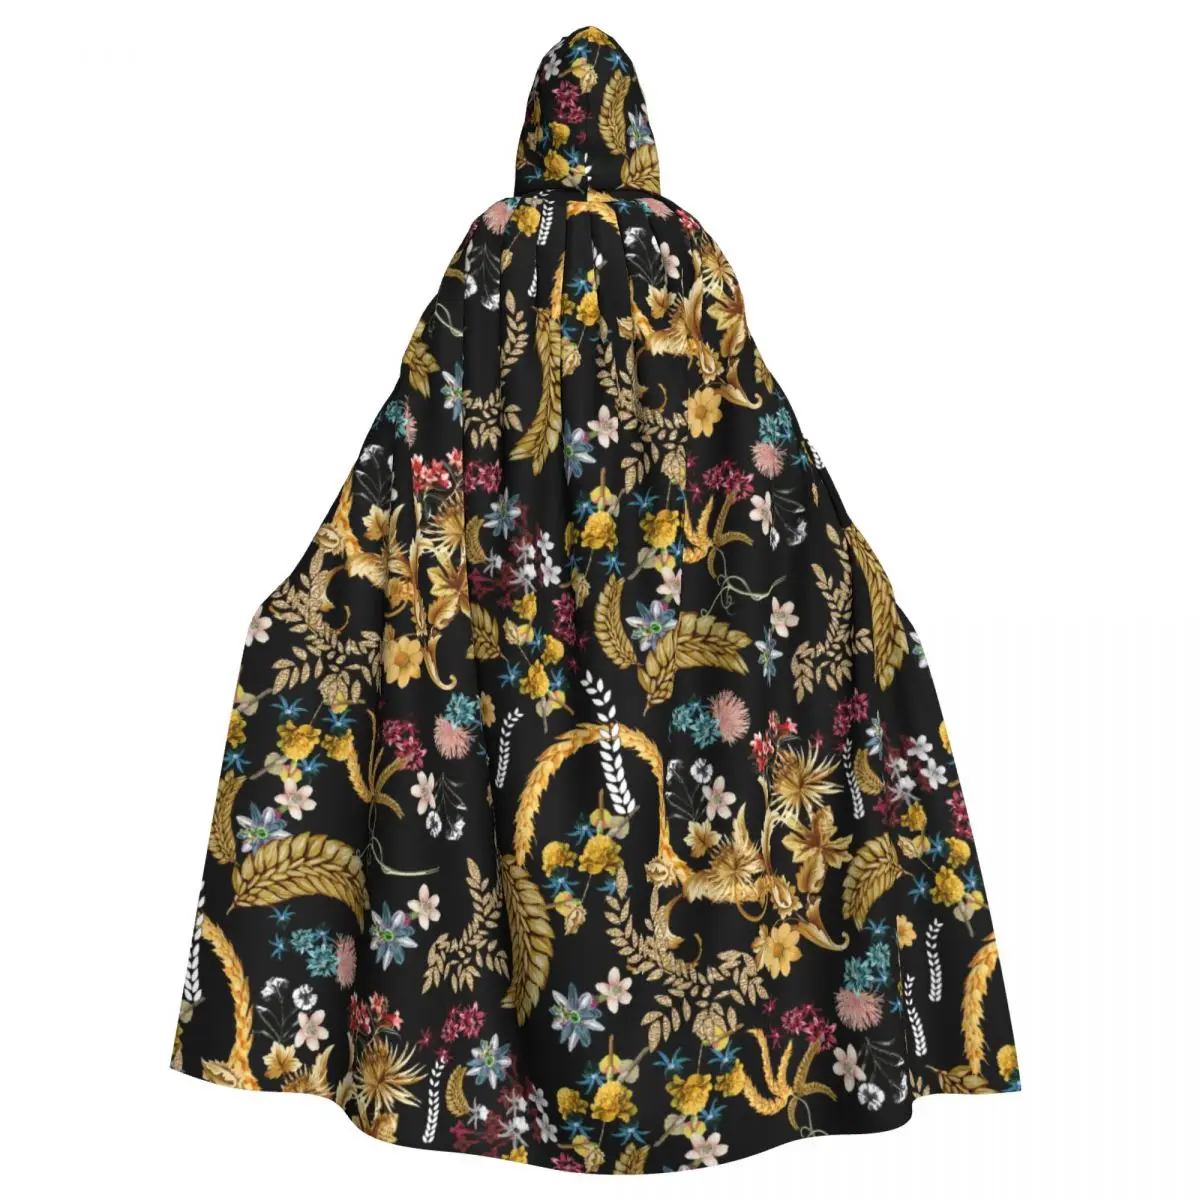 

Hooded Cloak Unisex Cloak with Hood Wheat Flower And Baroque Pattern Cloak Vampire Witch Cape Cosplay Costume